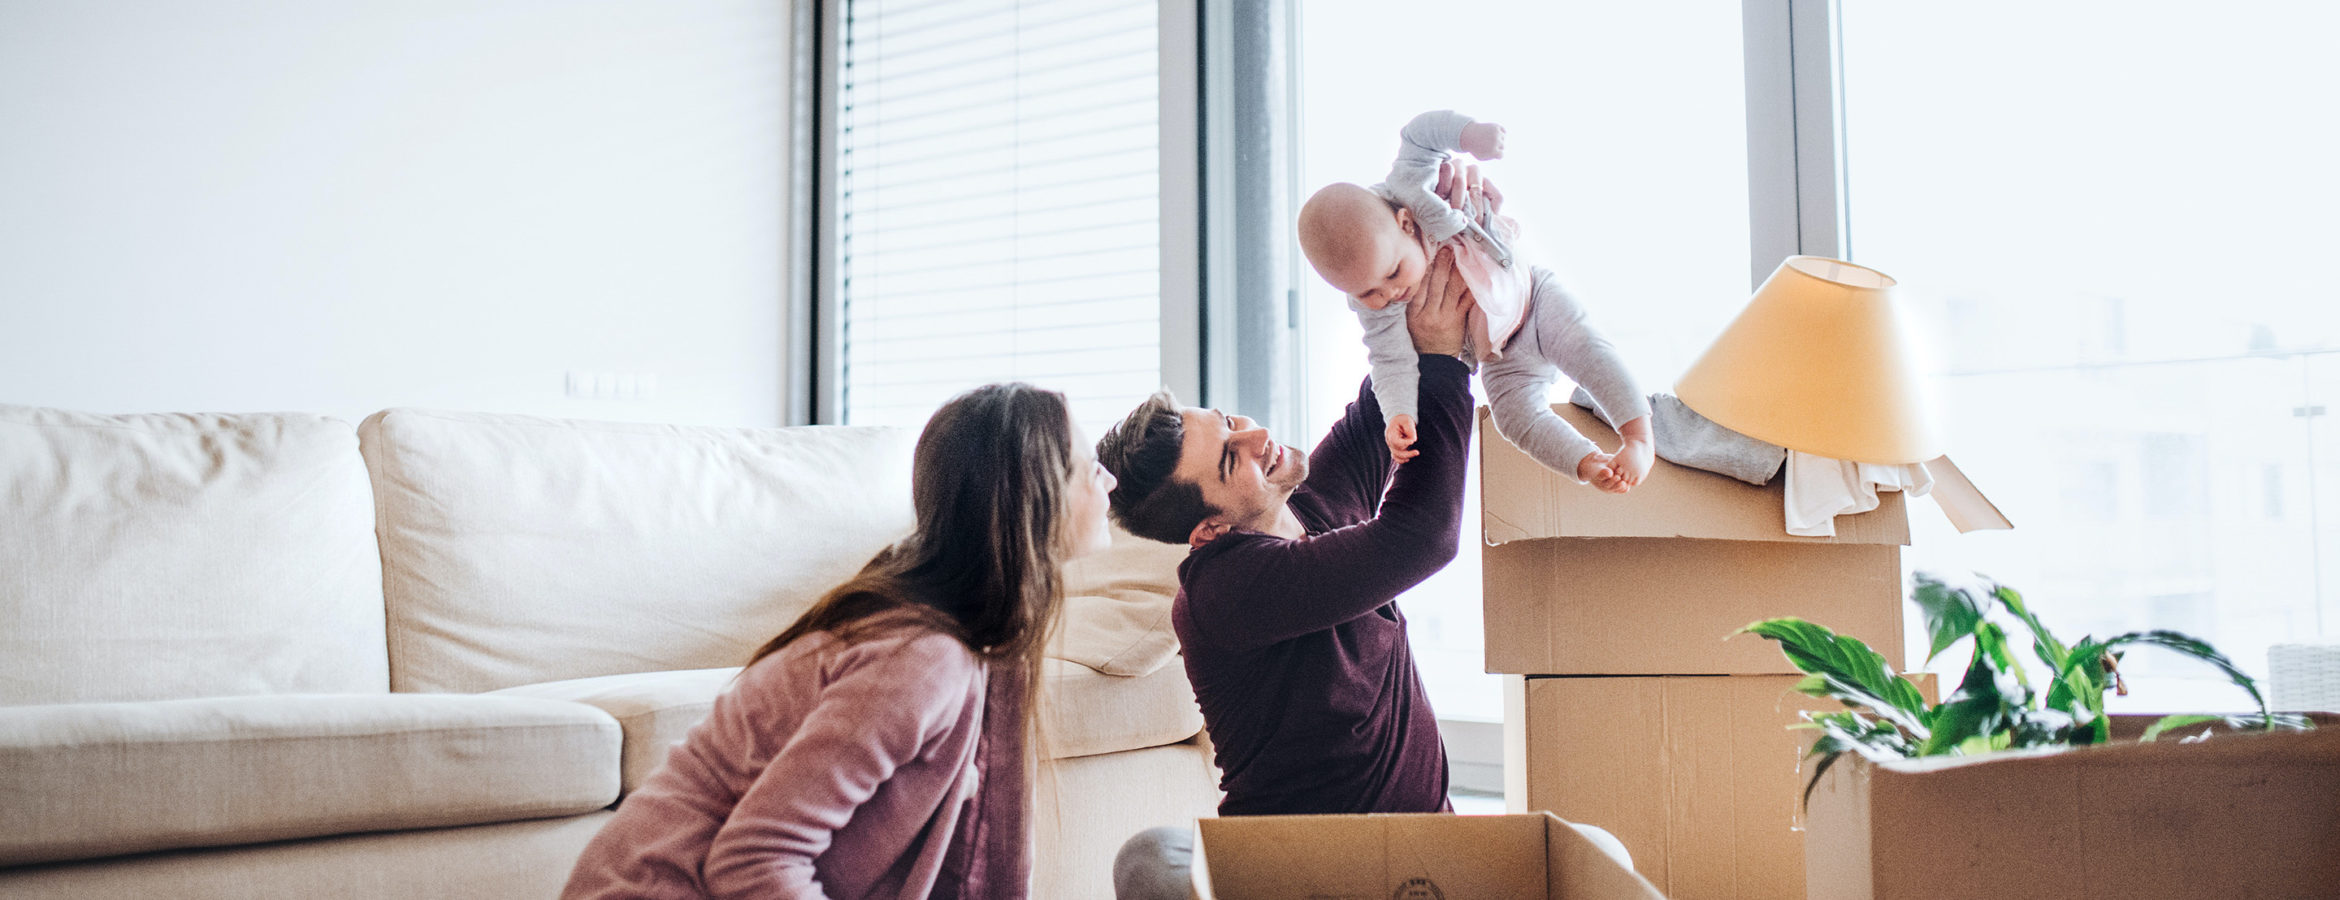 Young couple with a baby and cardboard boxes moving in a new home.